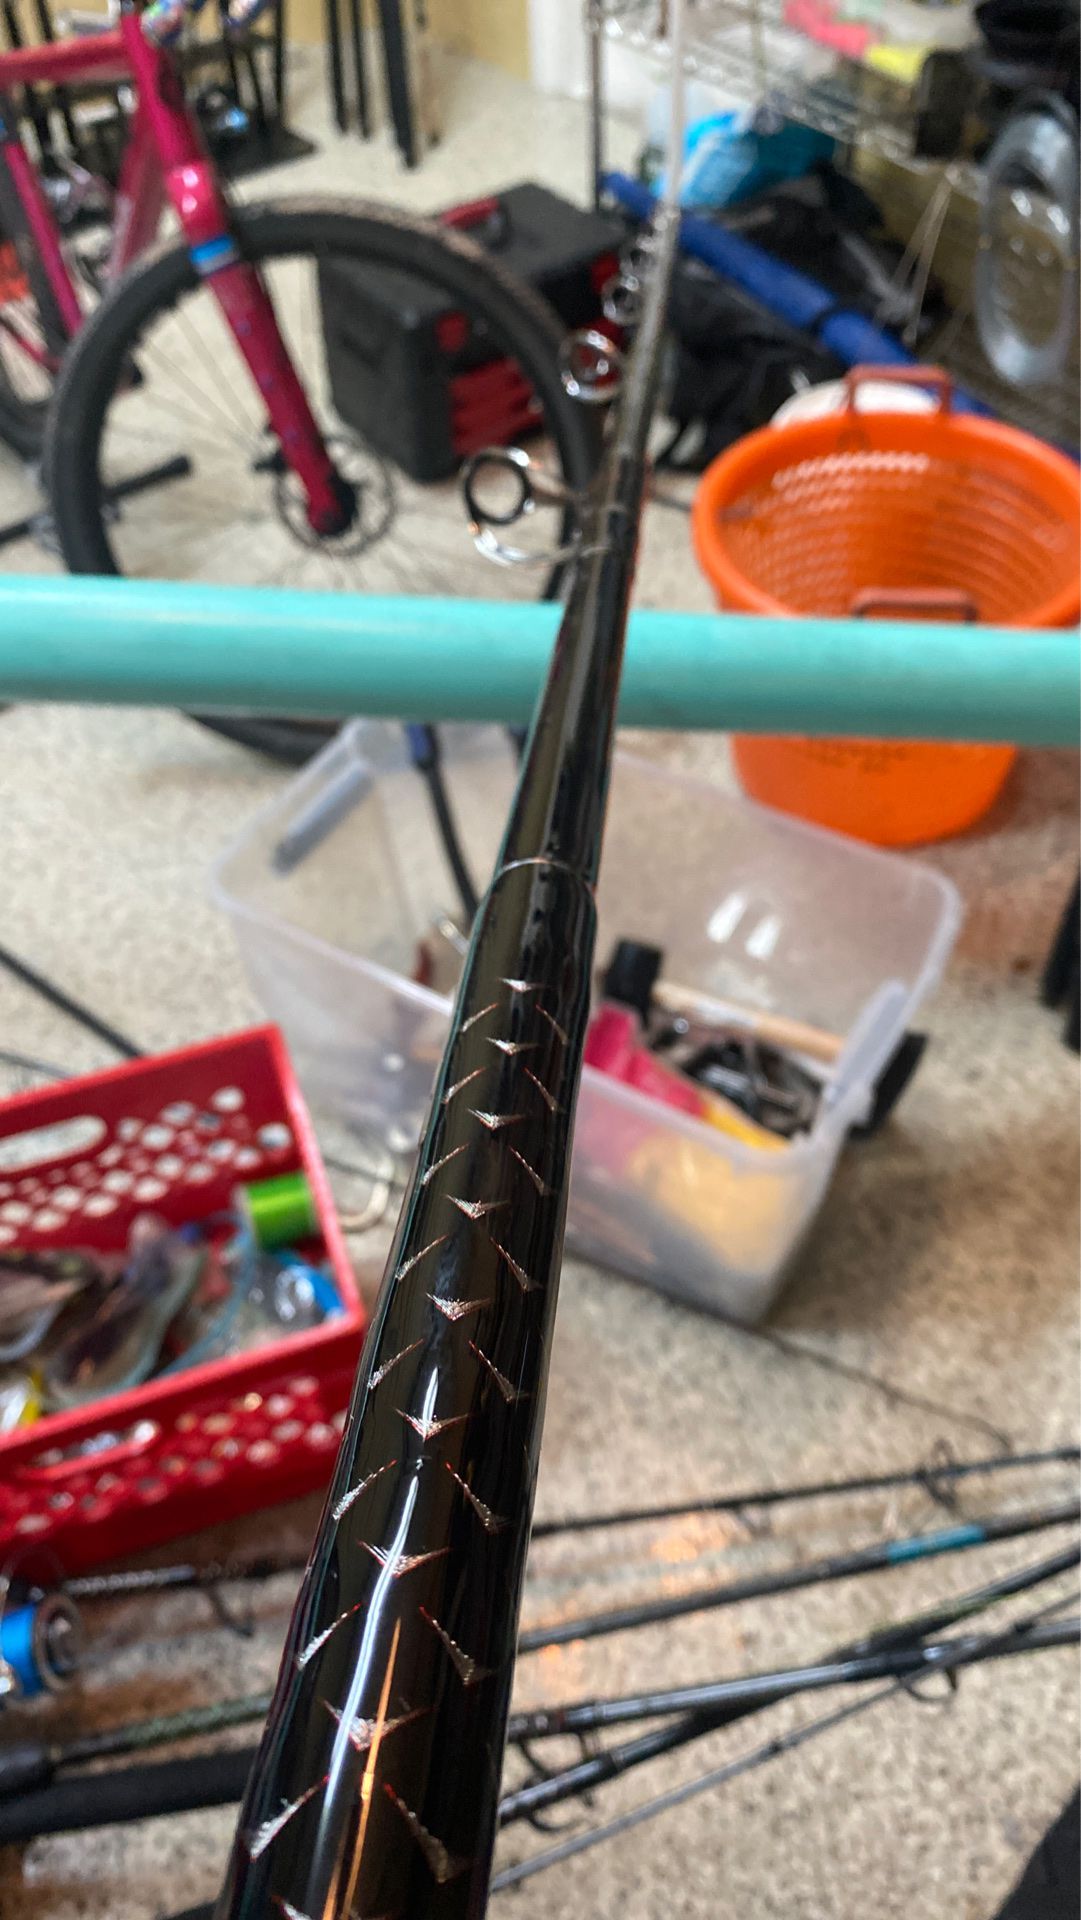 Deepdrop rod 80-130 perfect for SwordFishing/deedrop. Payed $750 at time of purchase